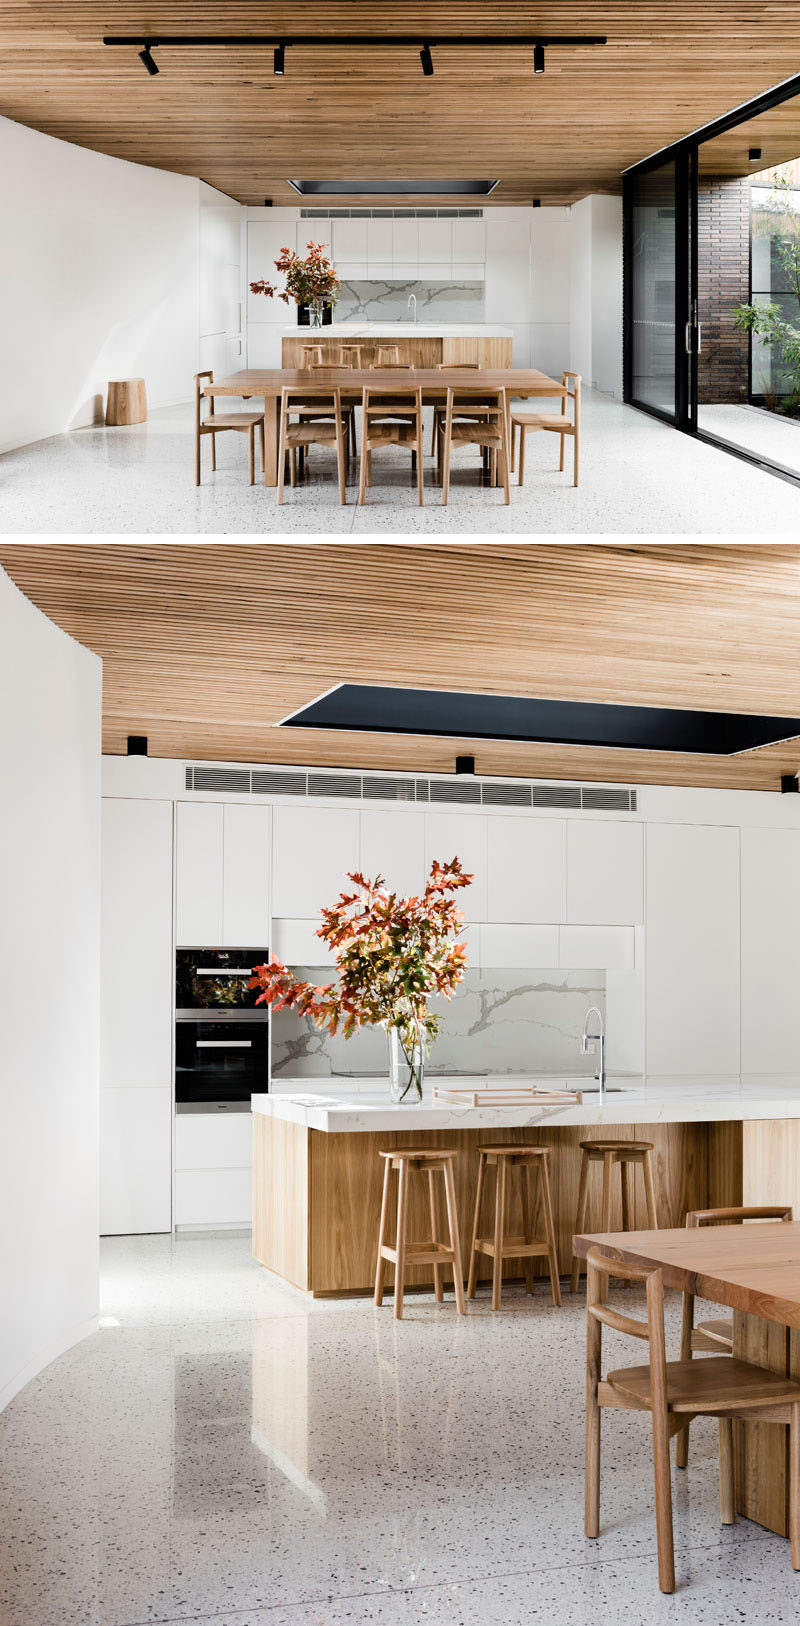 The light wood dining table and chairs compliment the ceiling and tie in with the modern and bright kitchen.